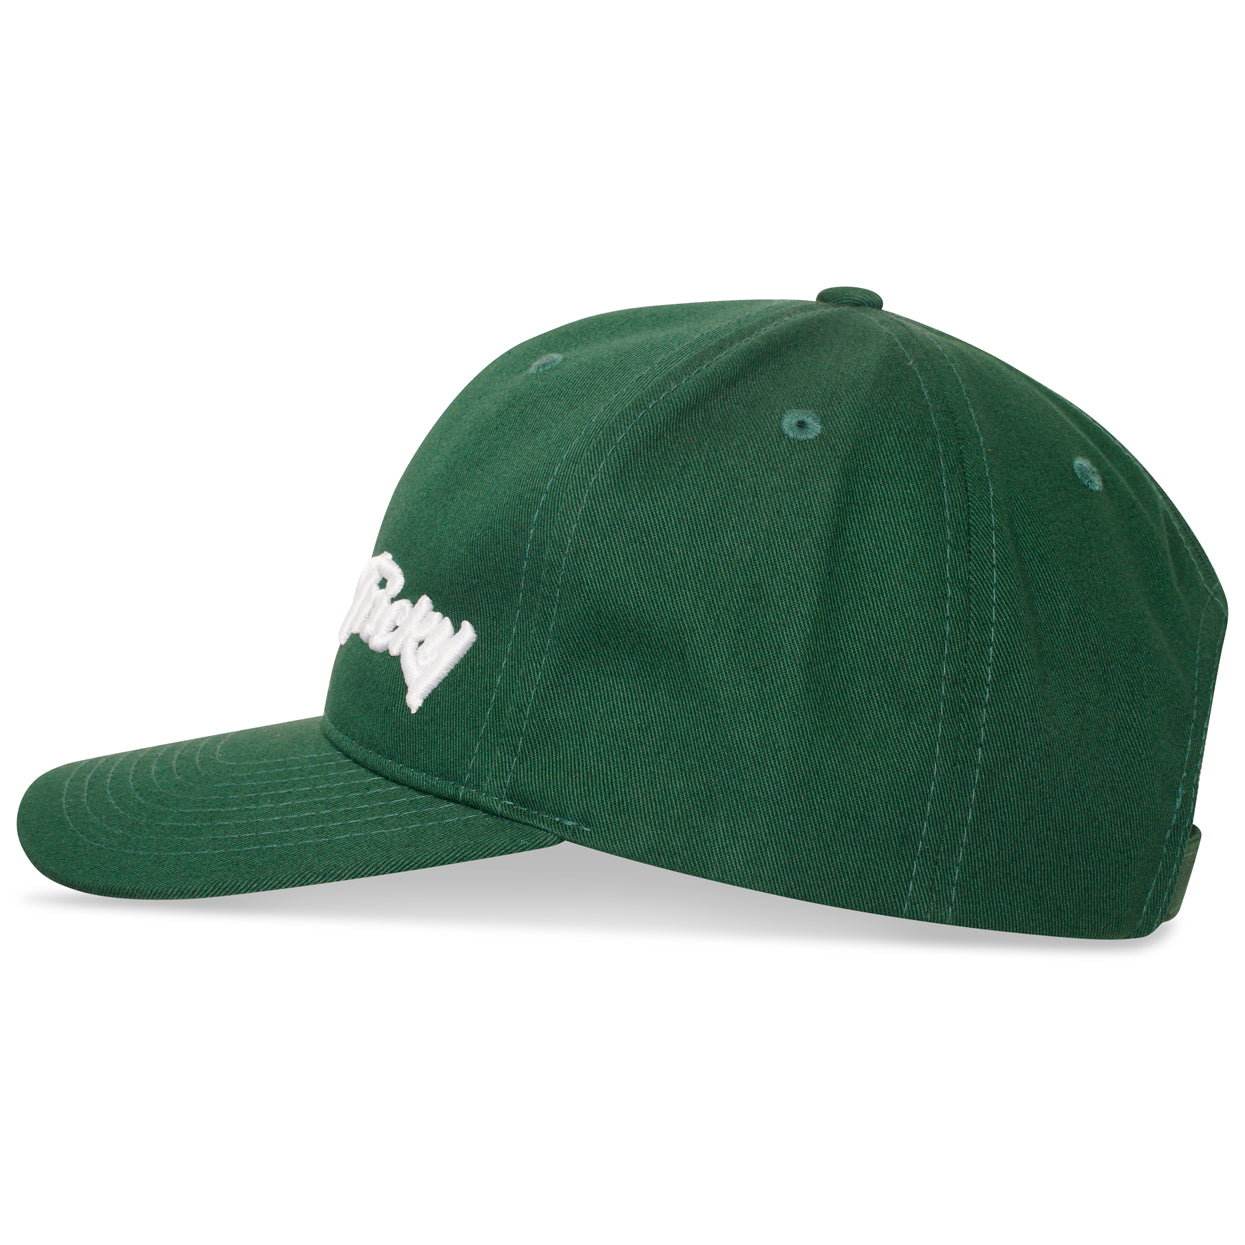 TRICKY SMALL LOGO COTTON 6 PANEL CAP GREEN